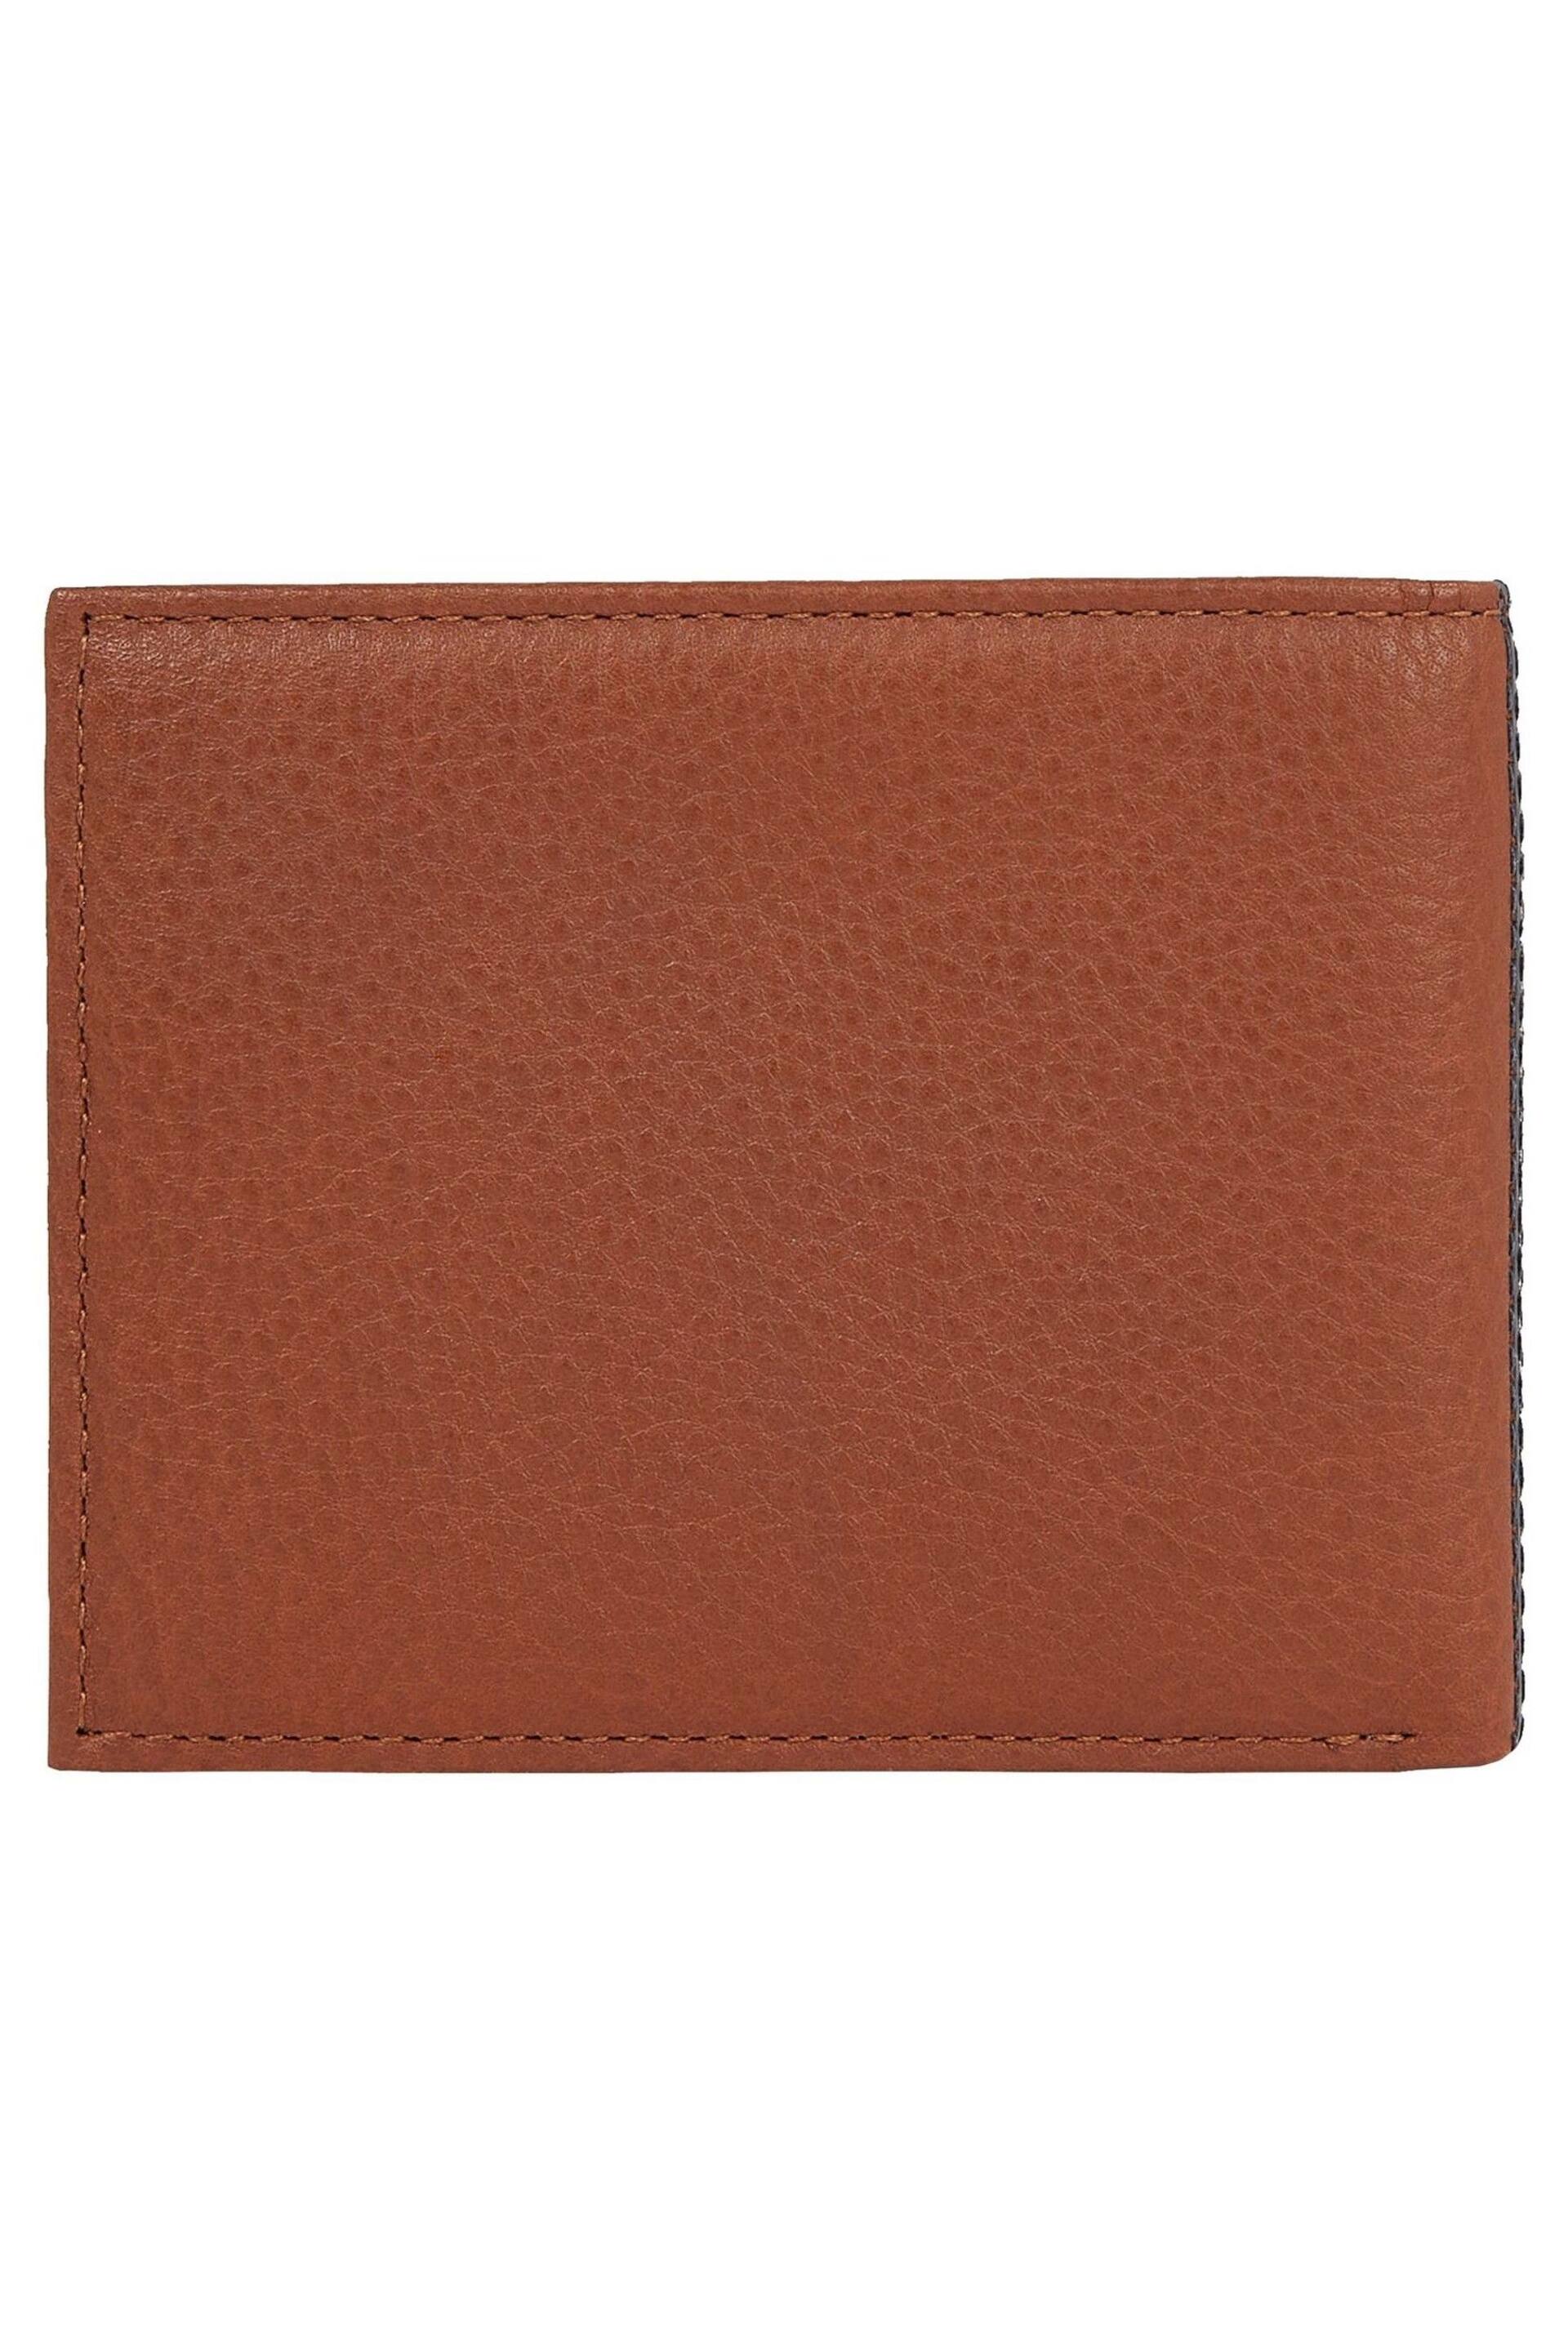 Tommy Hilfiger Premium Leather Mini Card Brown Wallet - Image 2 of 2